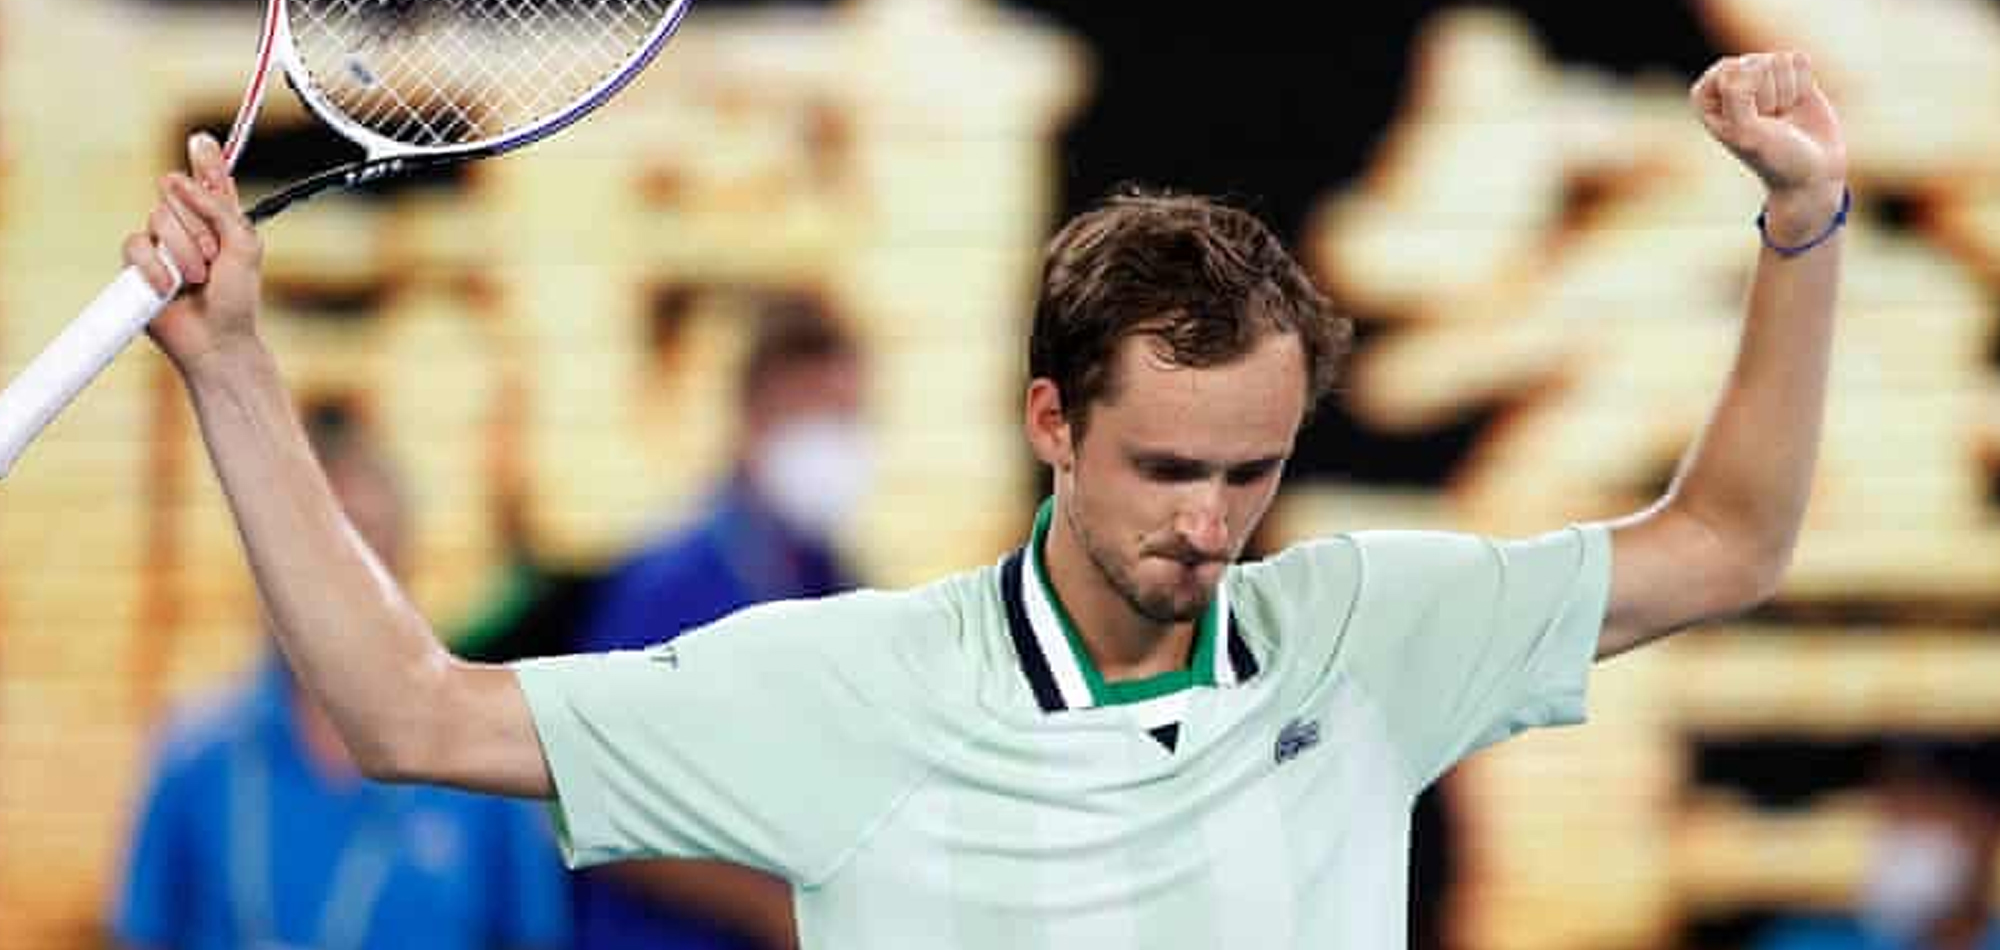 MEDVEDEV SAVES MATCH POINT, MOVES INTO AUSTRALIAN OPEN SEMIS